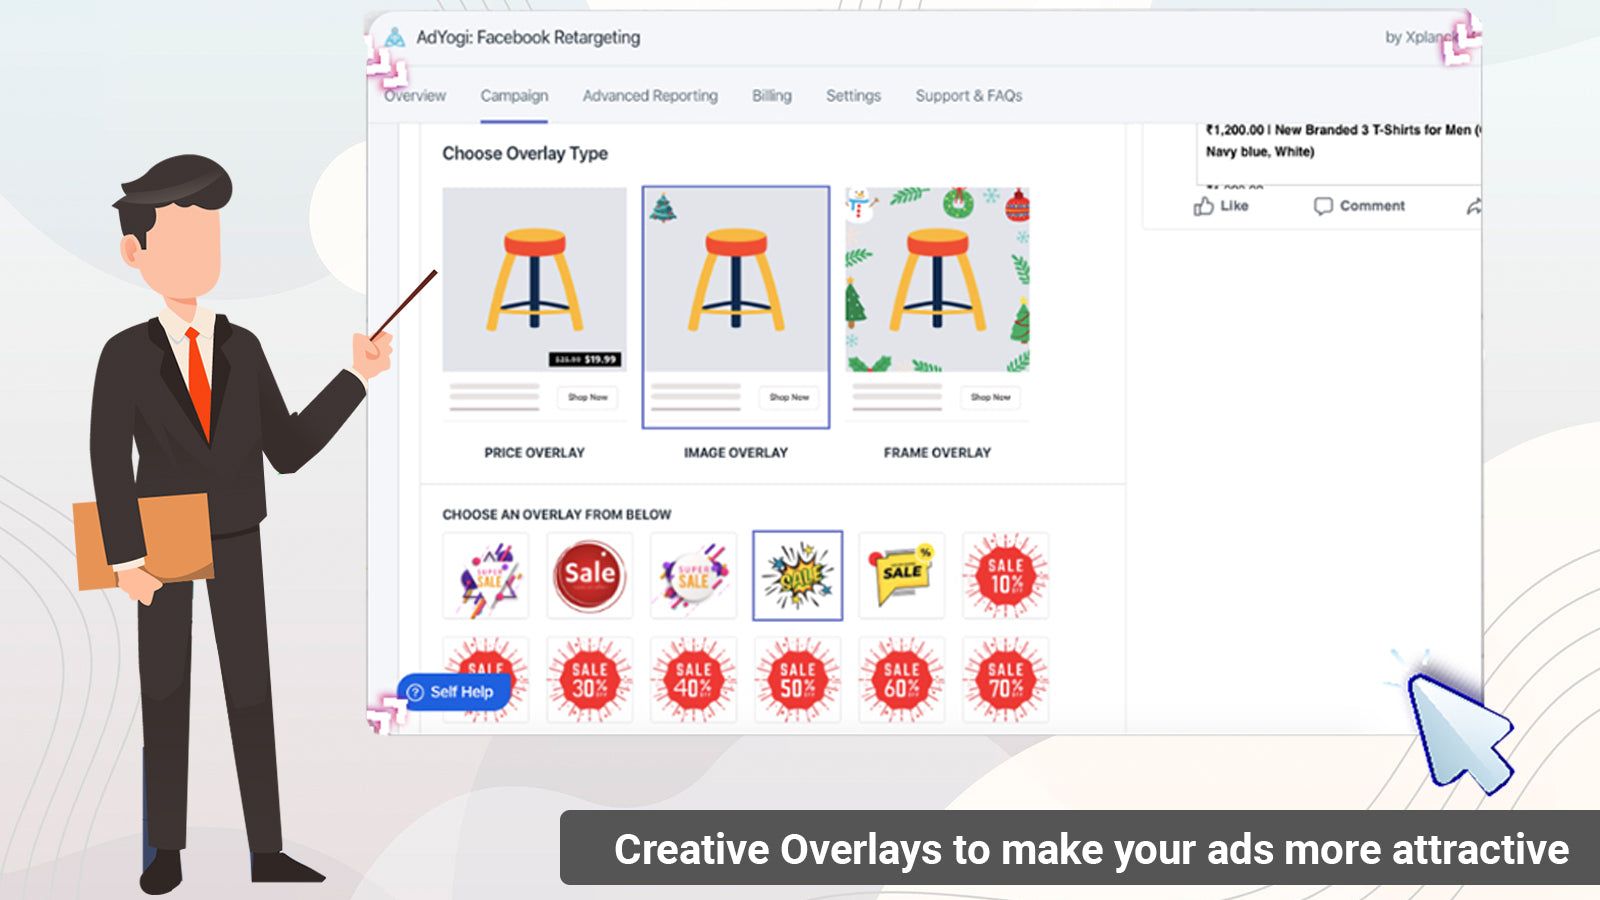 Customized Creative Overlays & Frames for better Ad Optimization